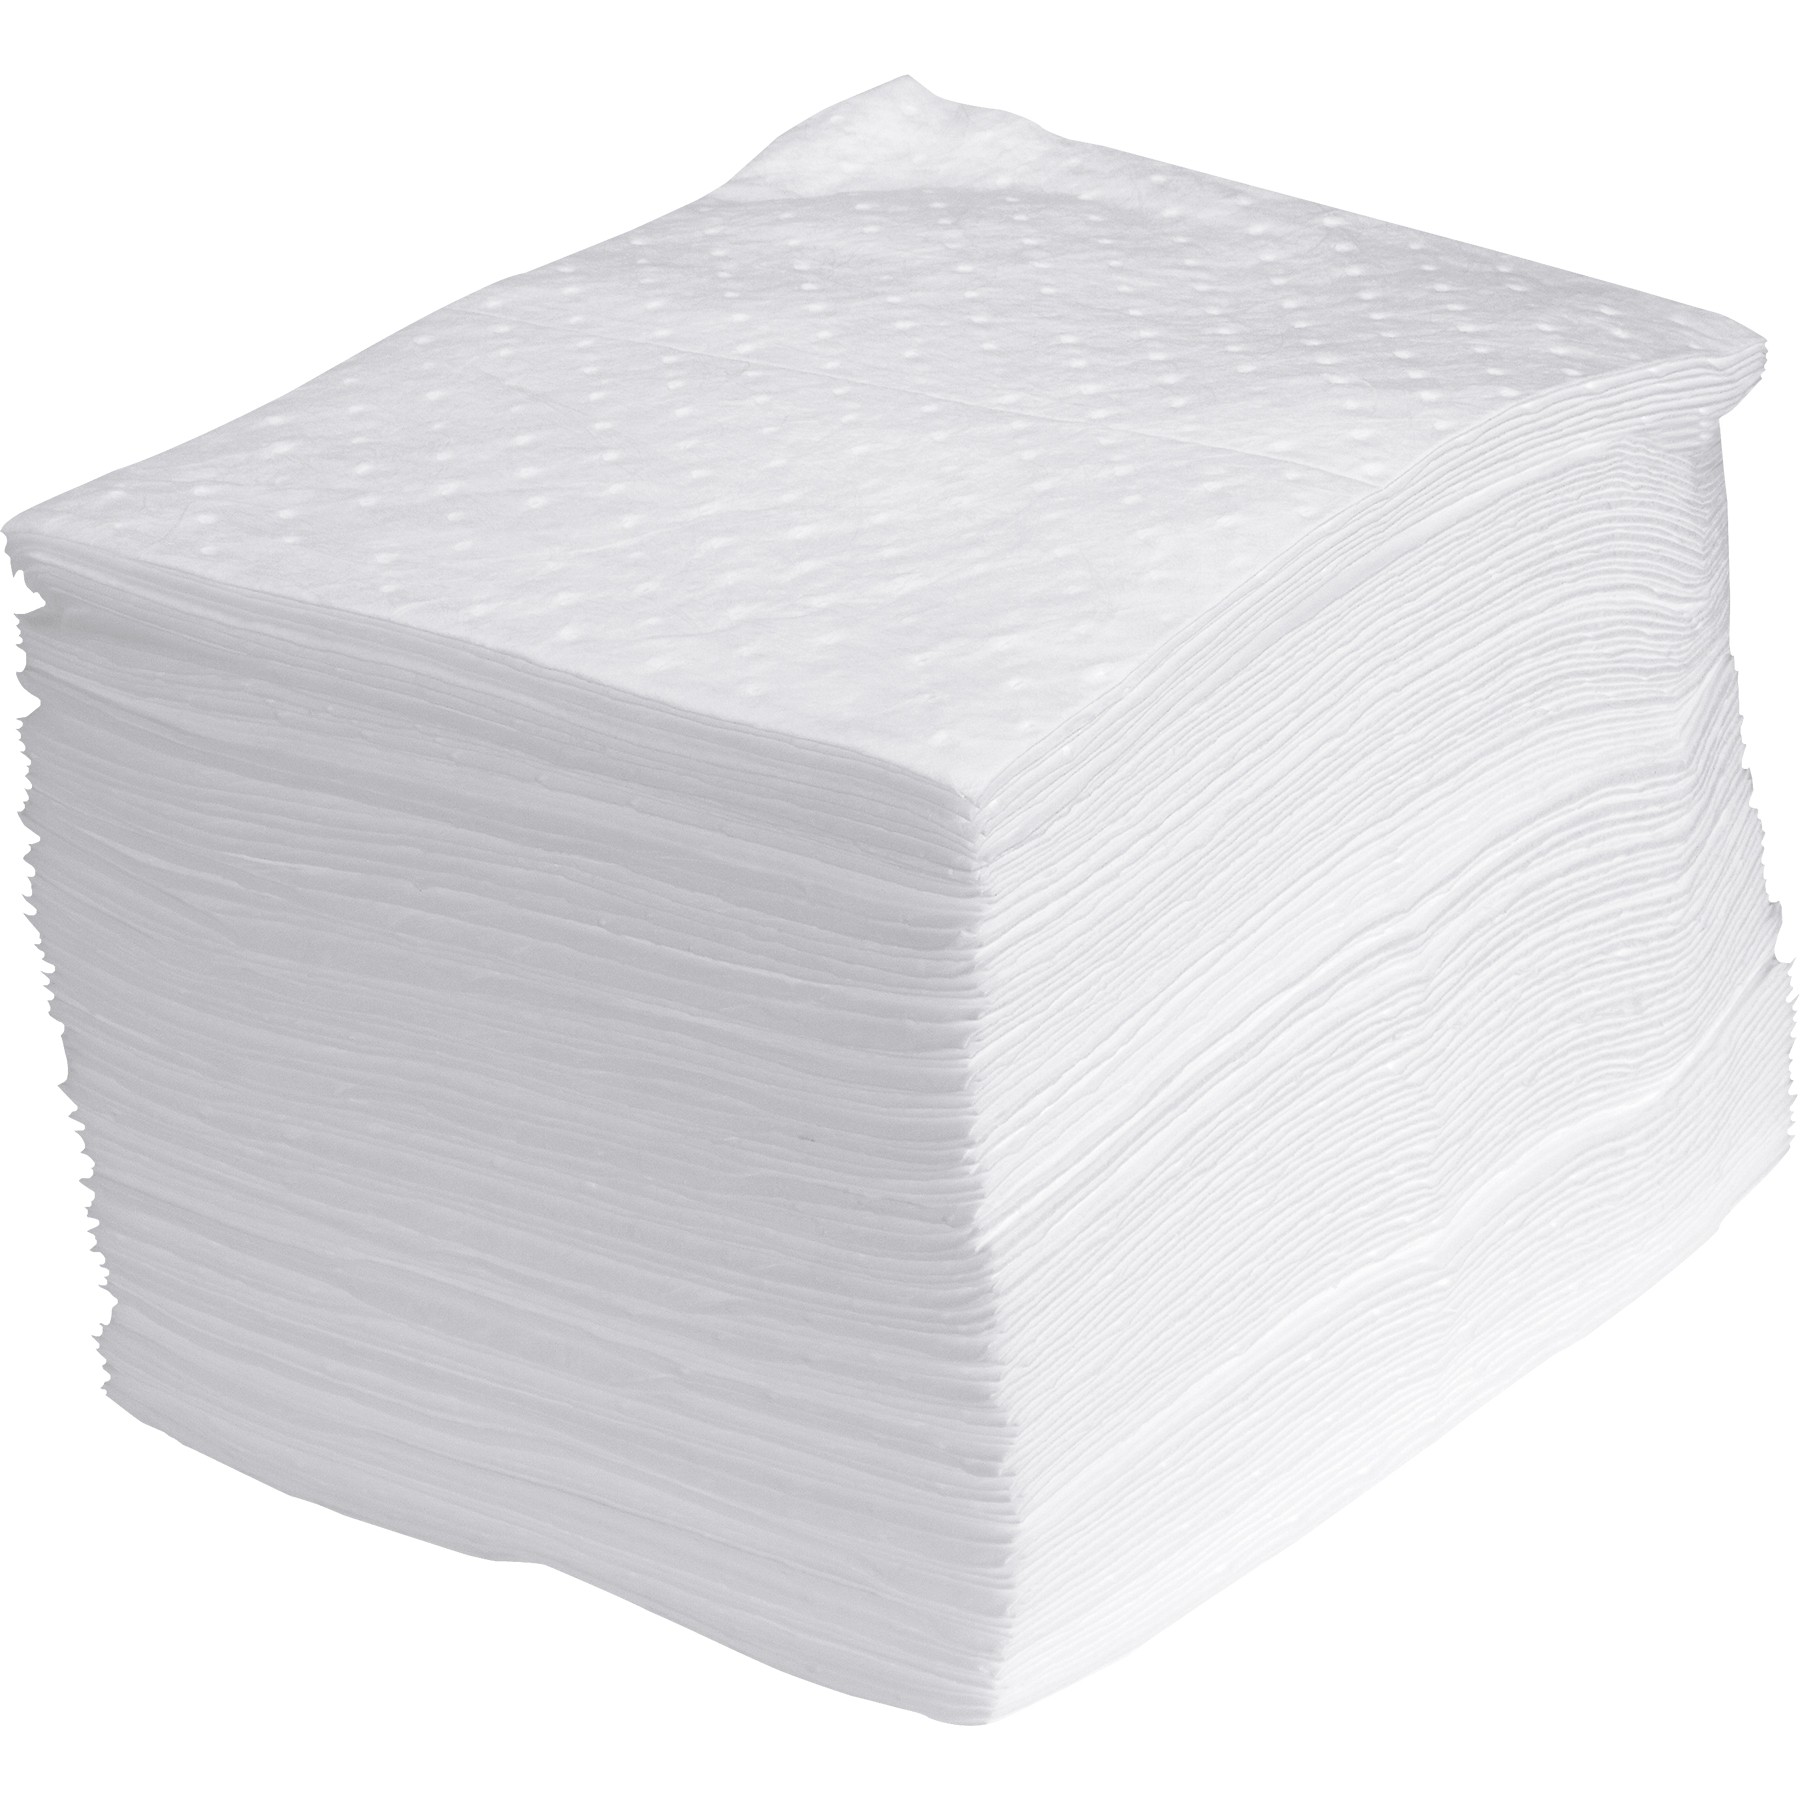 Absorbent Pad, 15&quot; x 18&quot;,
Medium Weight, (100/bale)
(Bale)